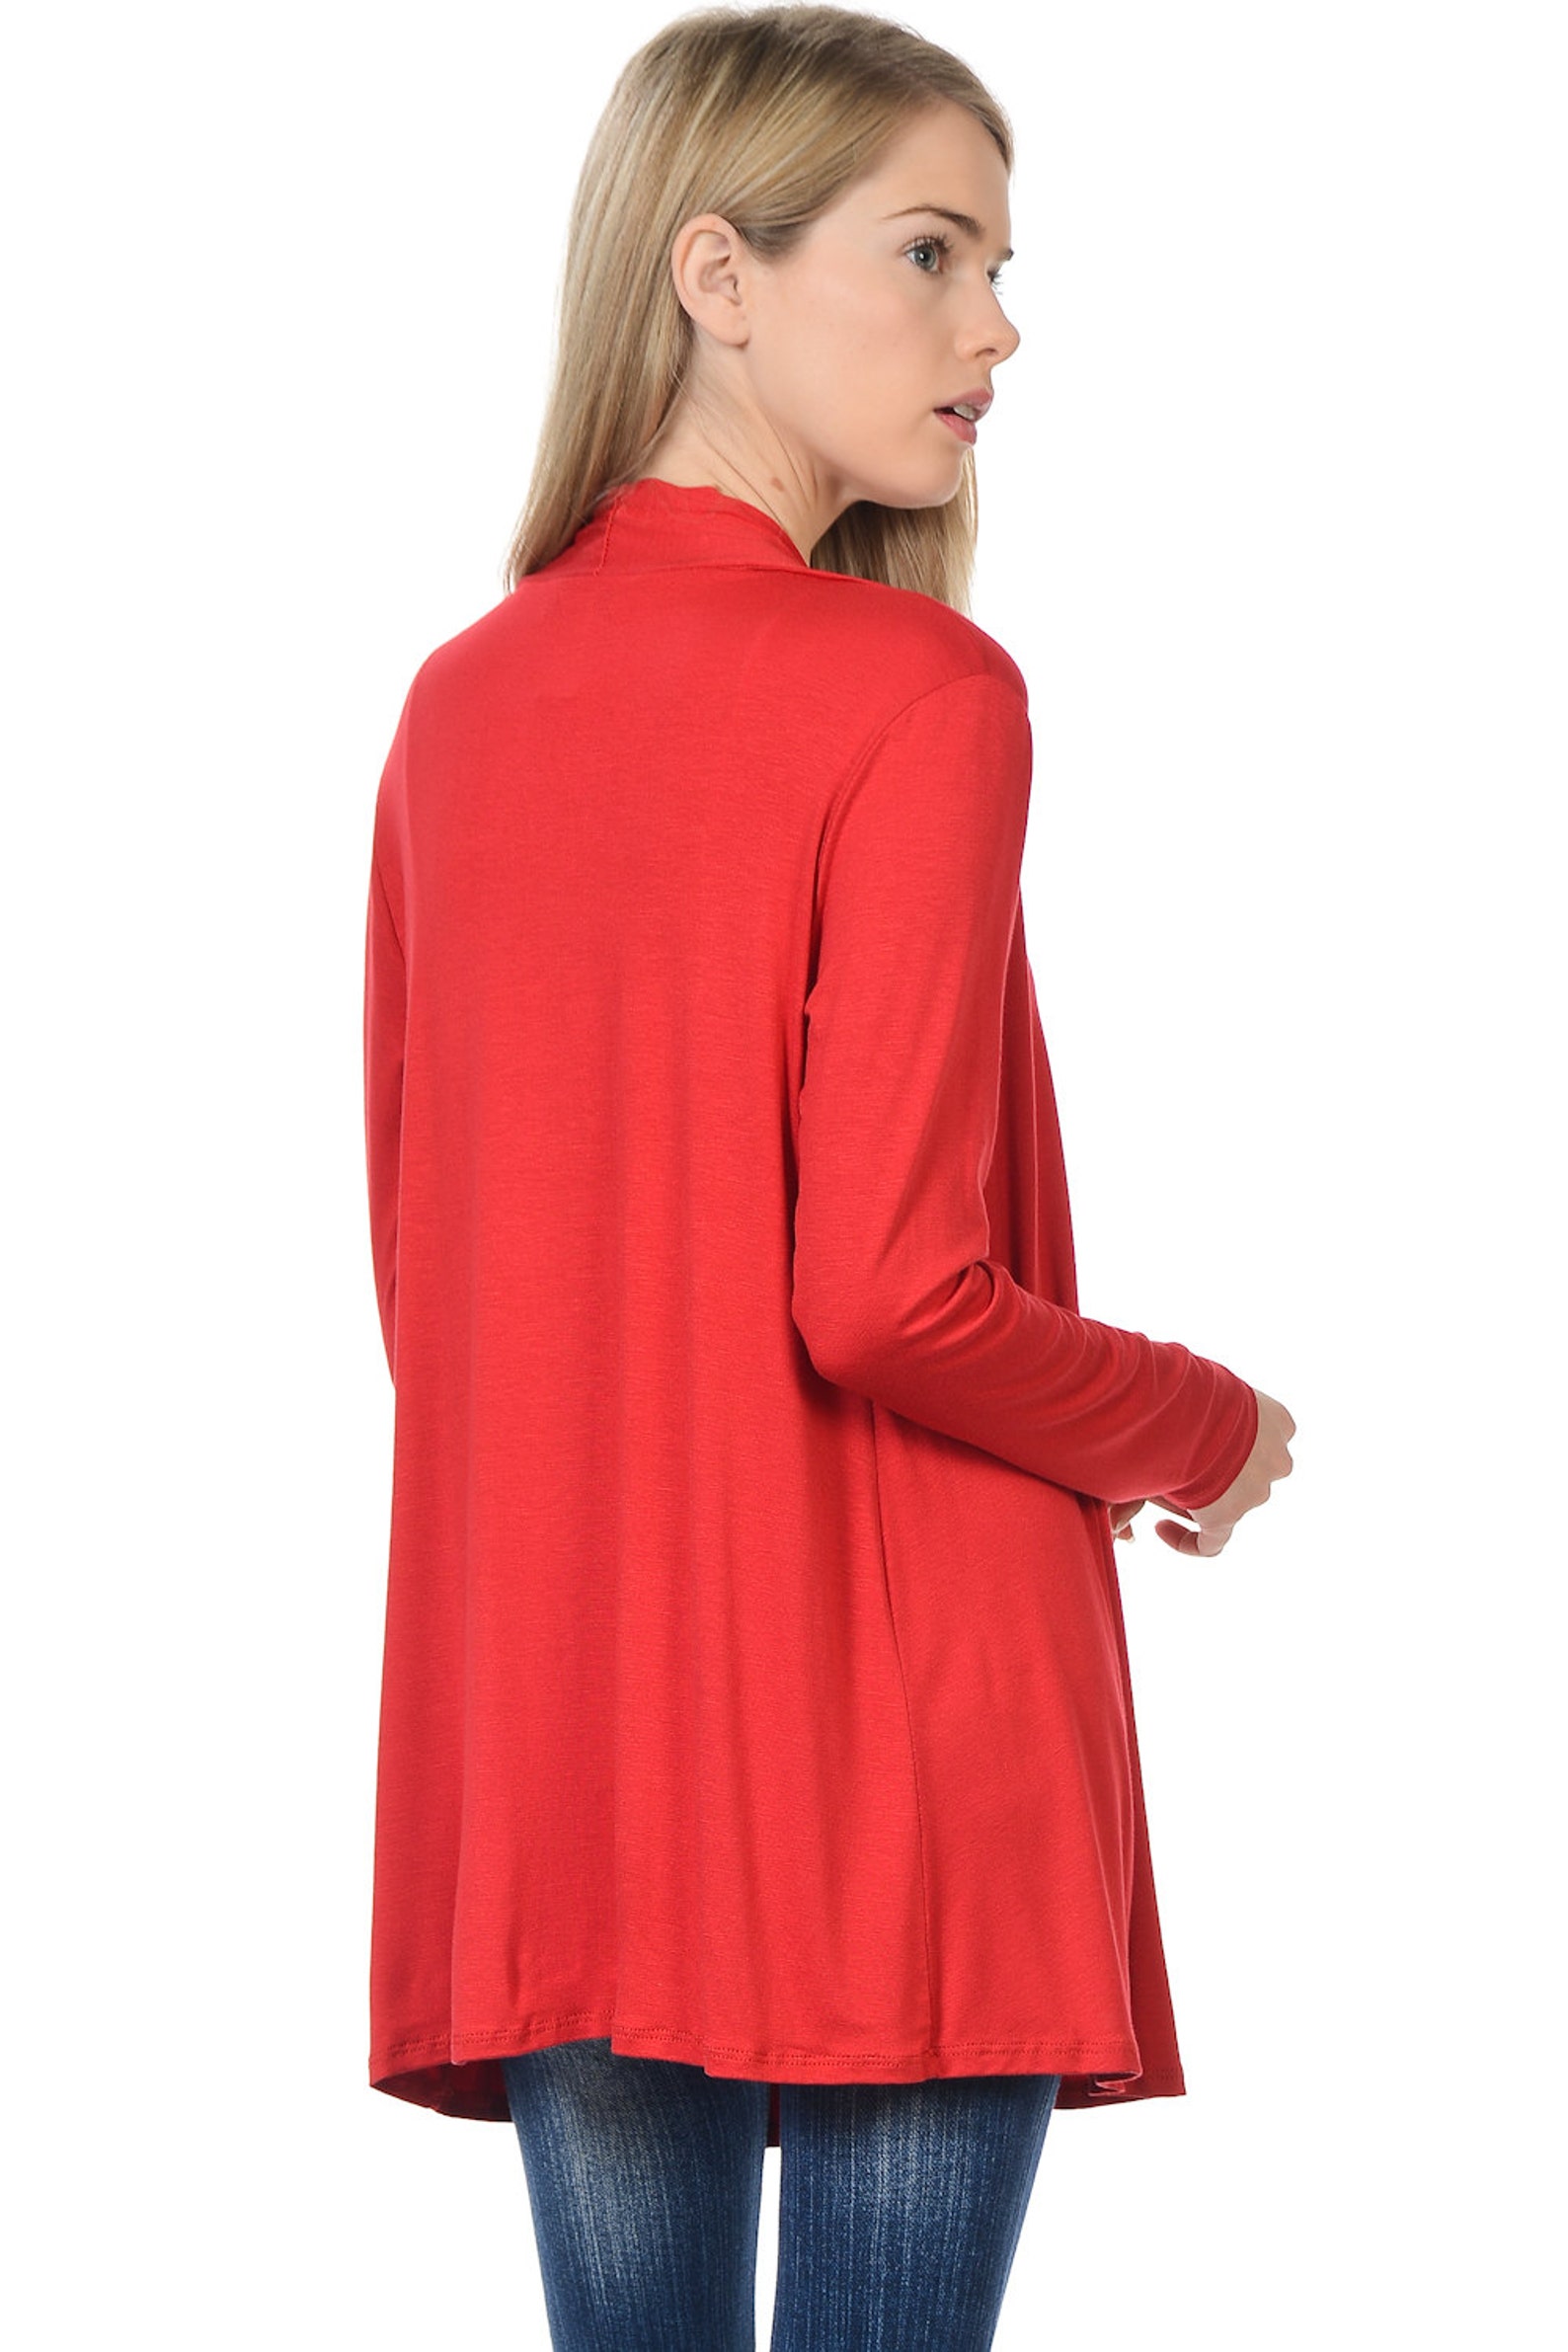 Solid Rayon Spandex Long Sleeve Jersey Cardigan Sweater Red - Etsy